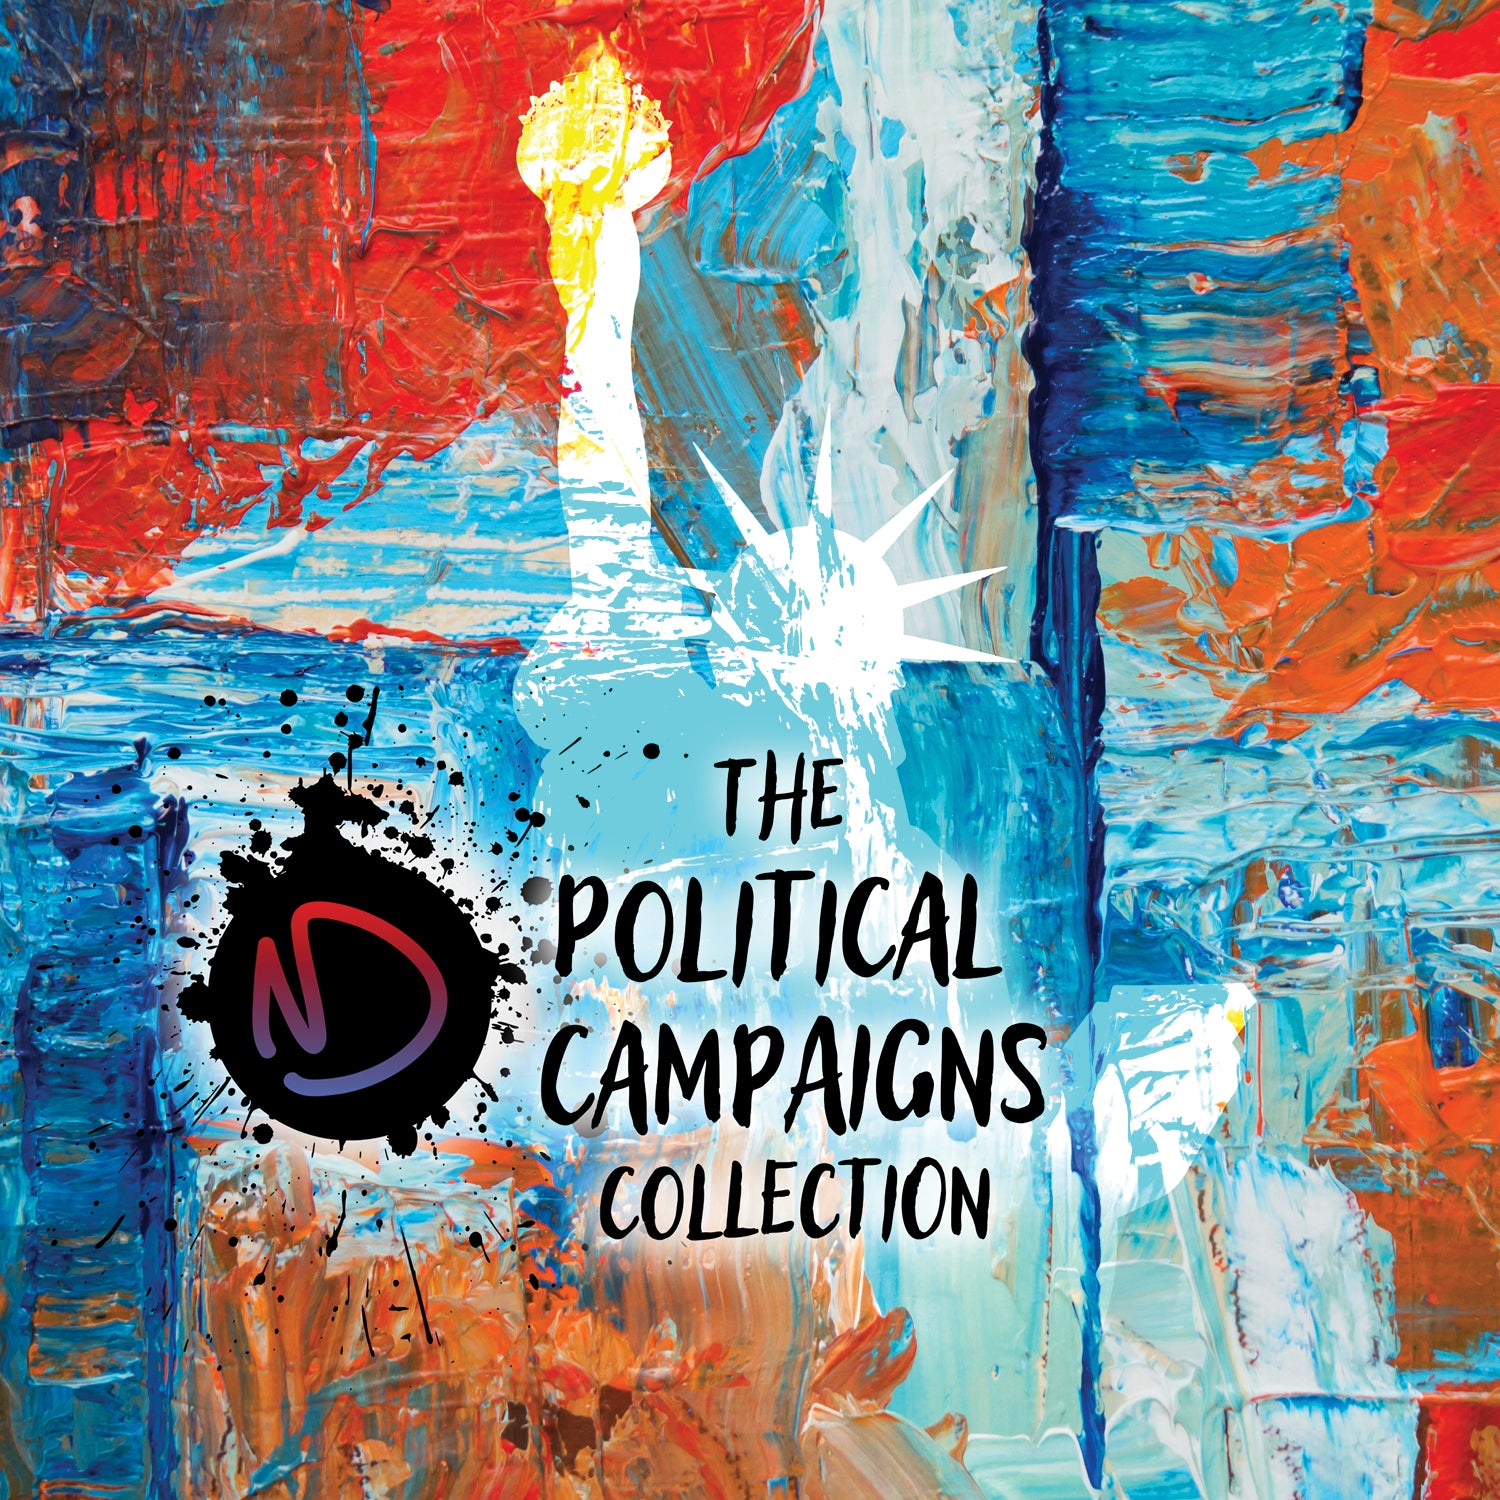 The Political Campaigns Collection